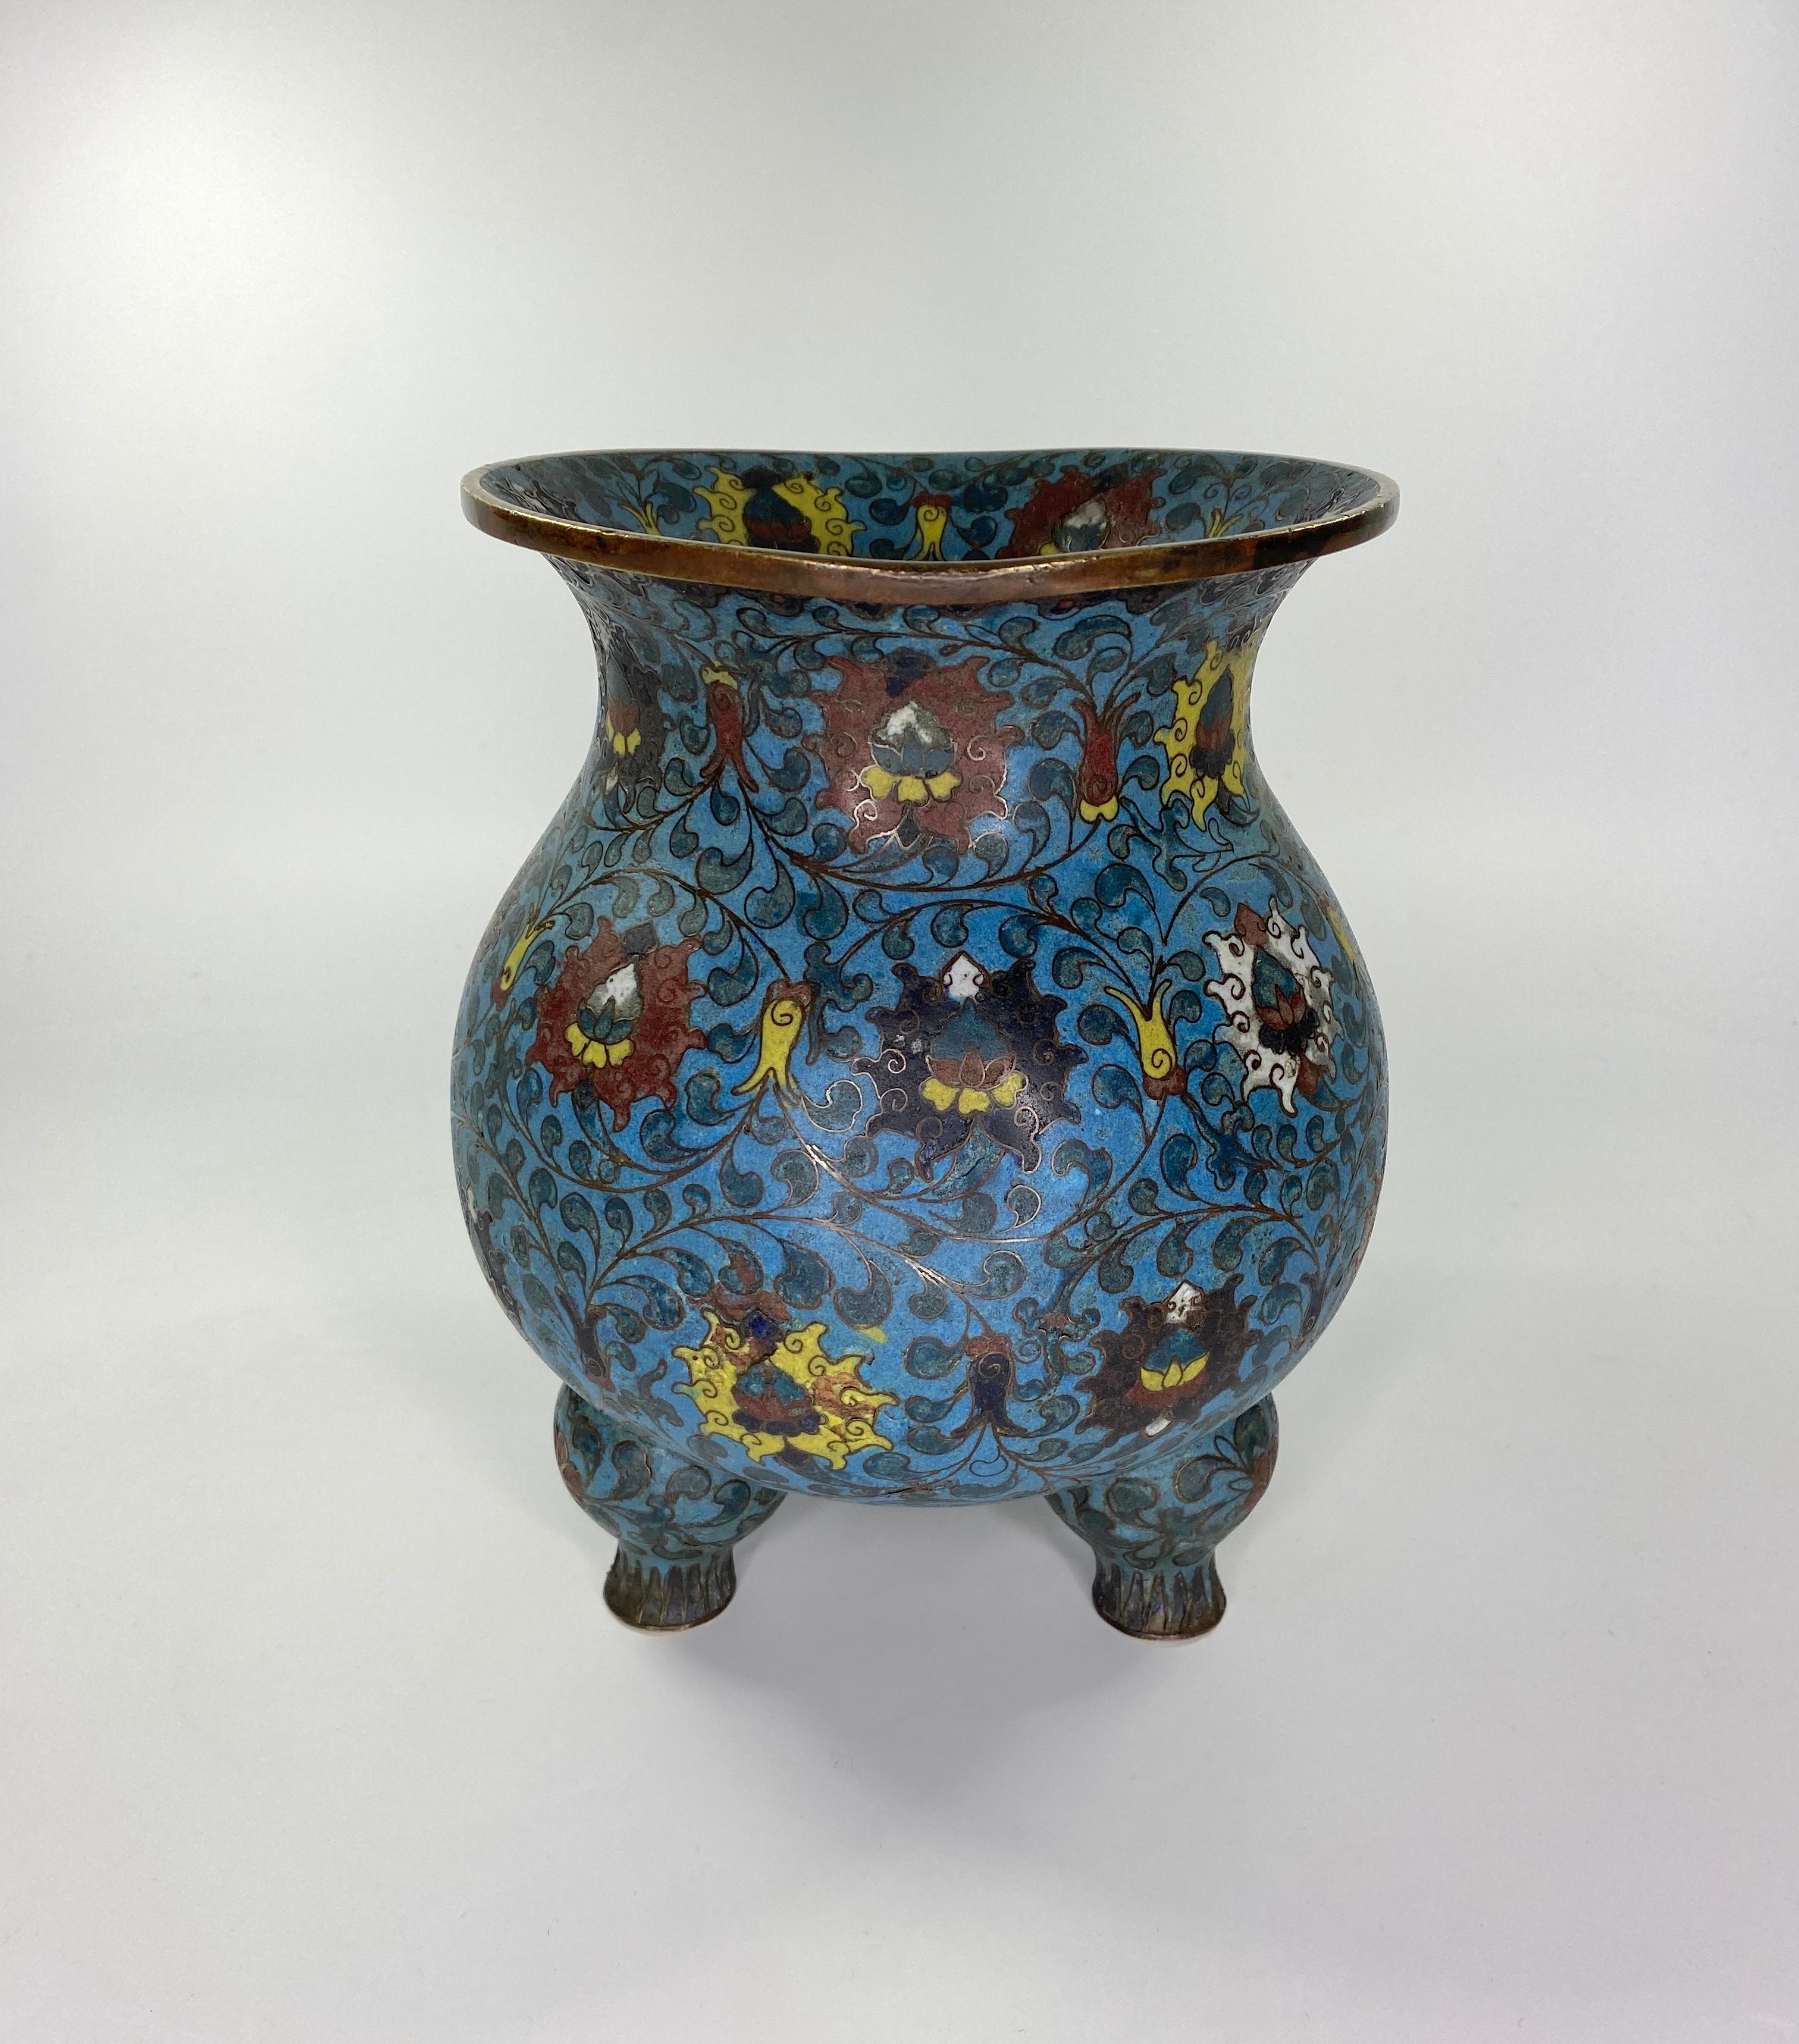 Chinese cloisonne enamel censer, of large size, 17th century, Ming Dynasty.
The bronze globular body, decorated with a continuous band of flowering lotus scroll, upon a blue ground, a pattern that is repeated to the interior rim. Set upon three